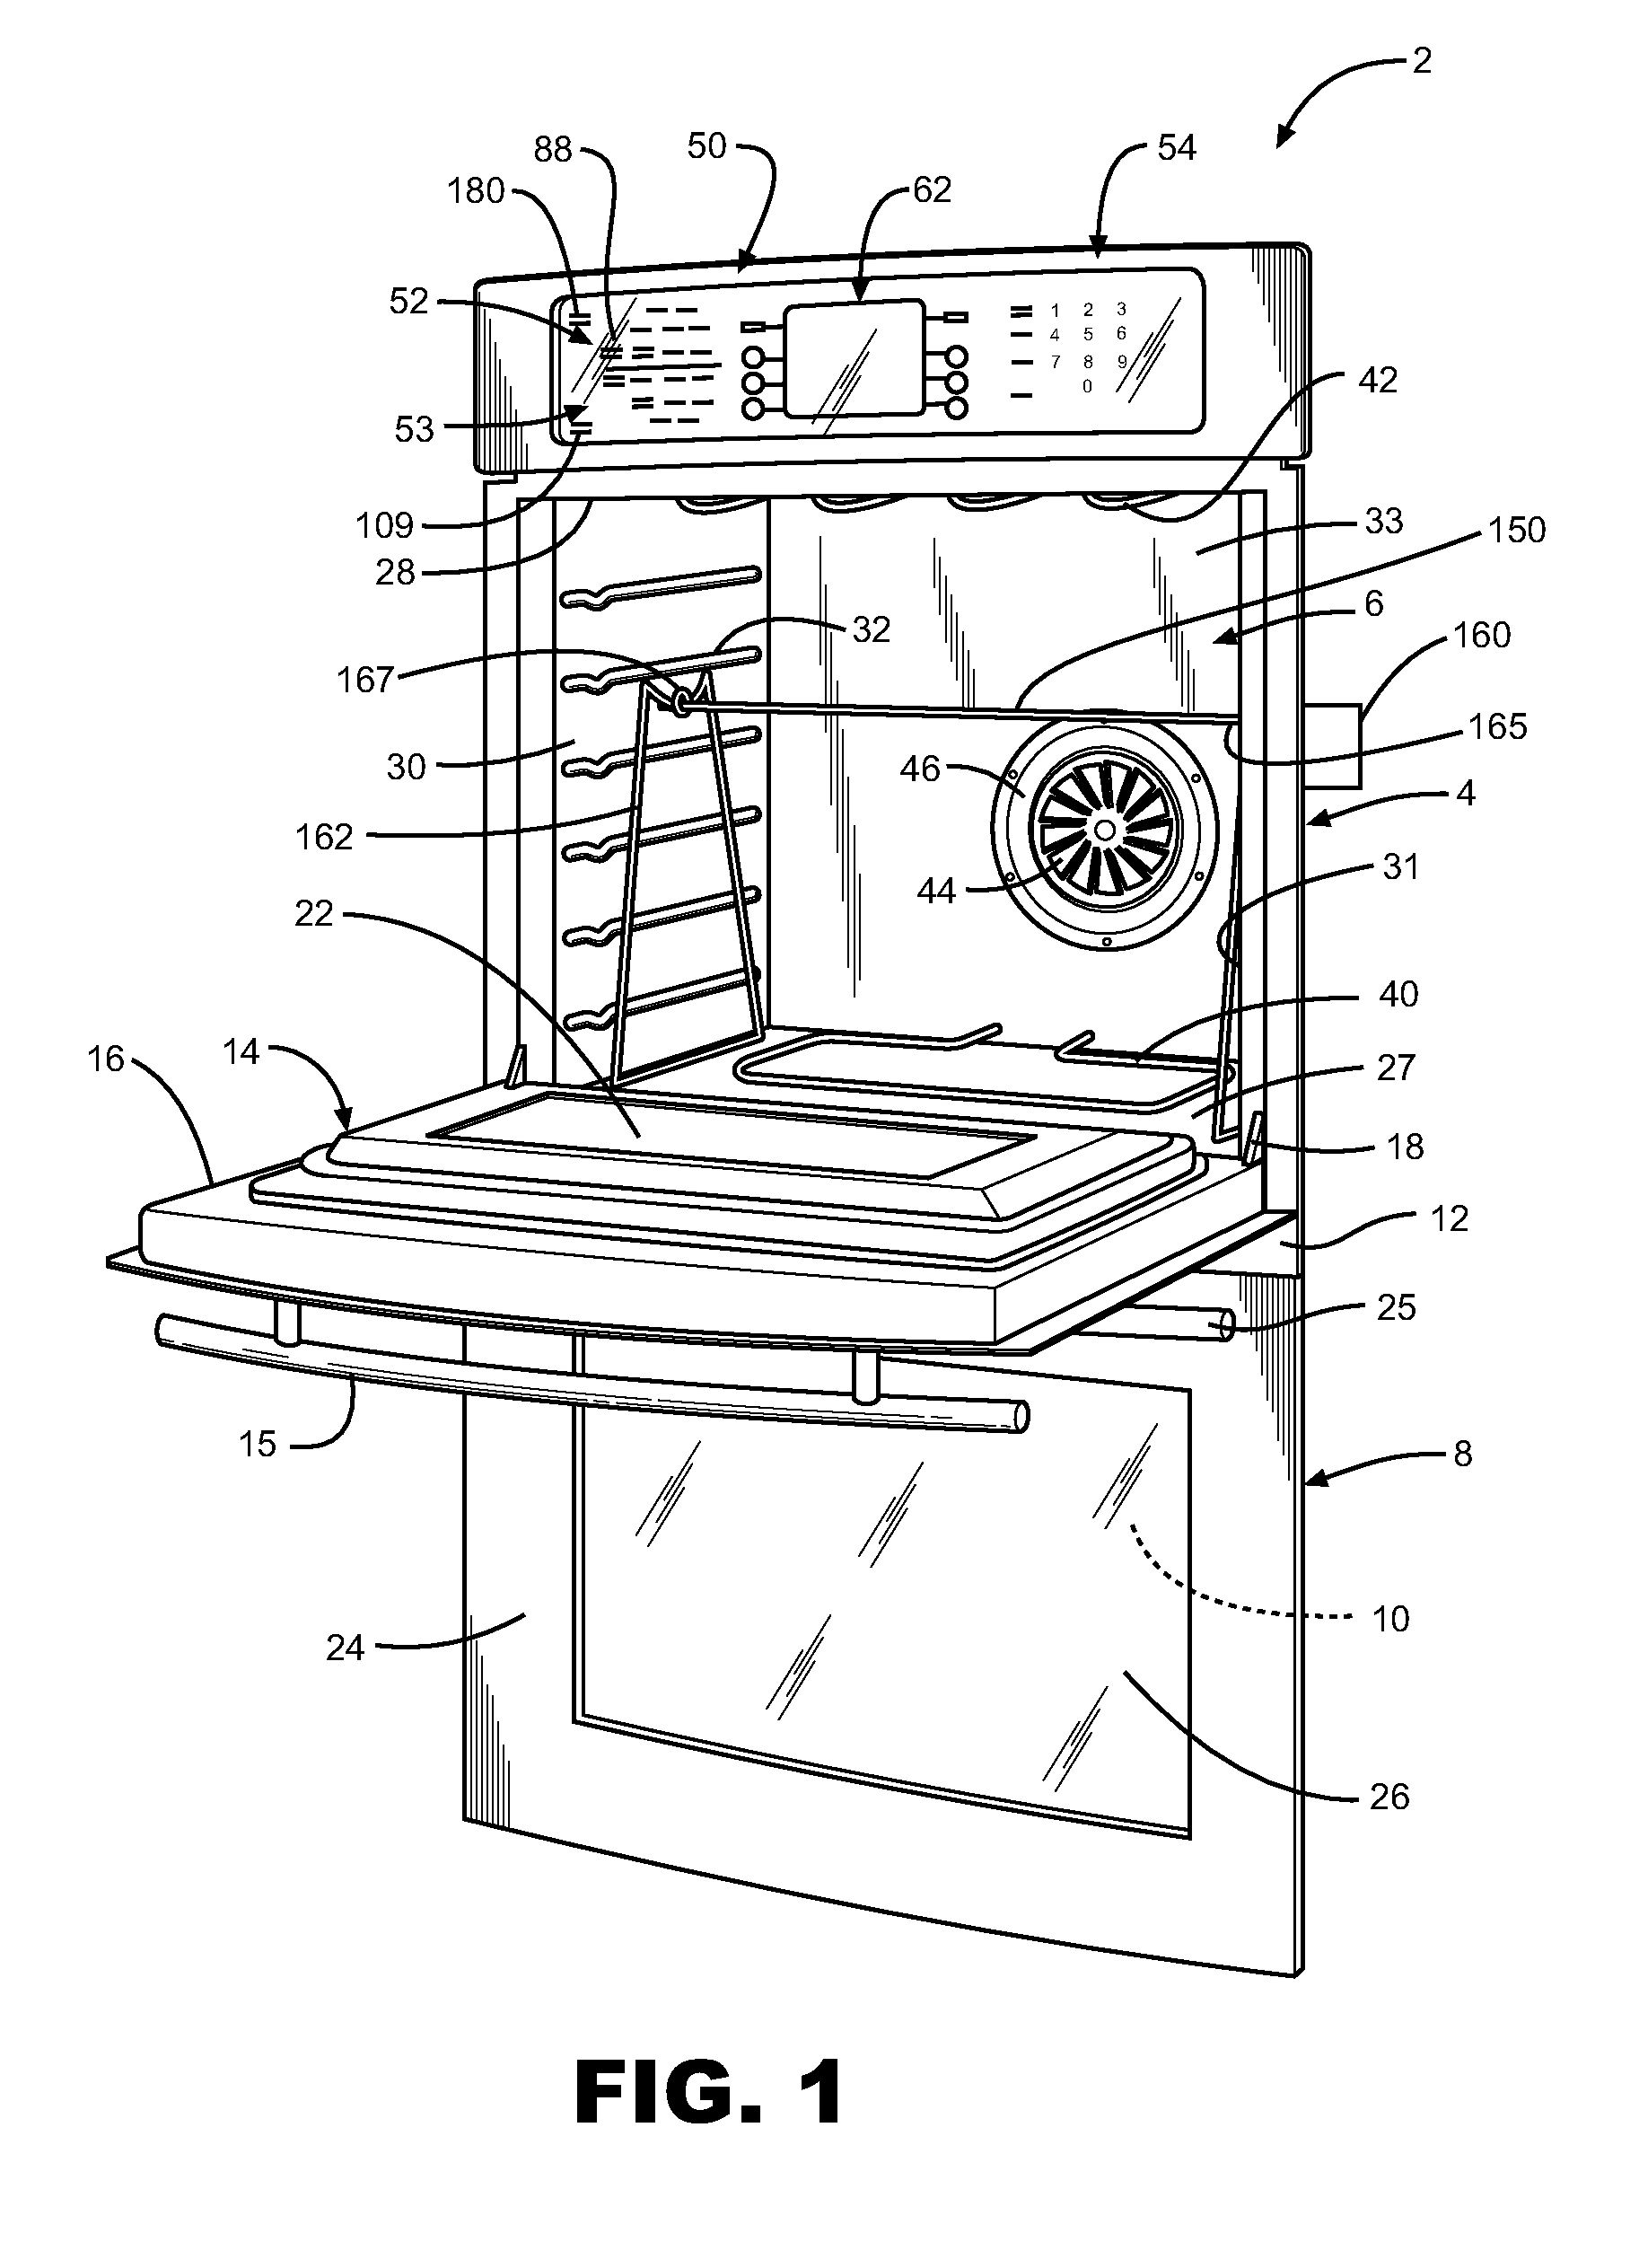 System and method for operating rotisserie oven